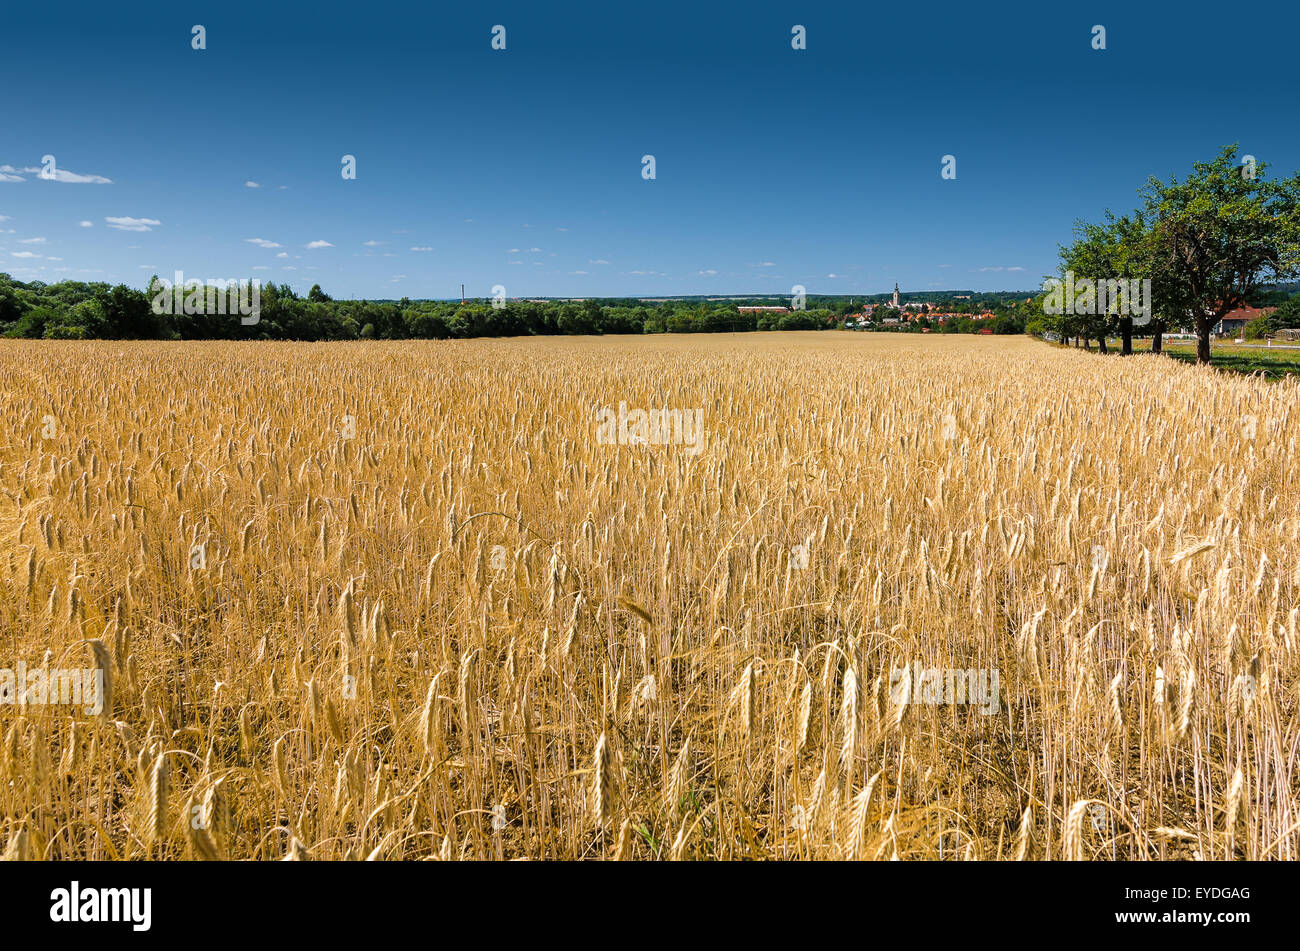 Golden crop field in the country side Stock Photo